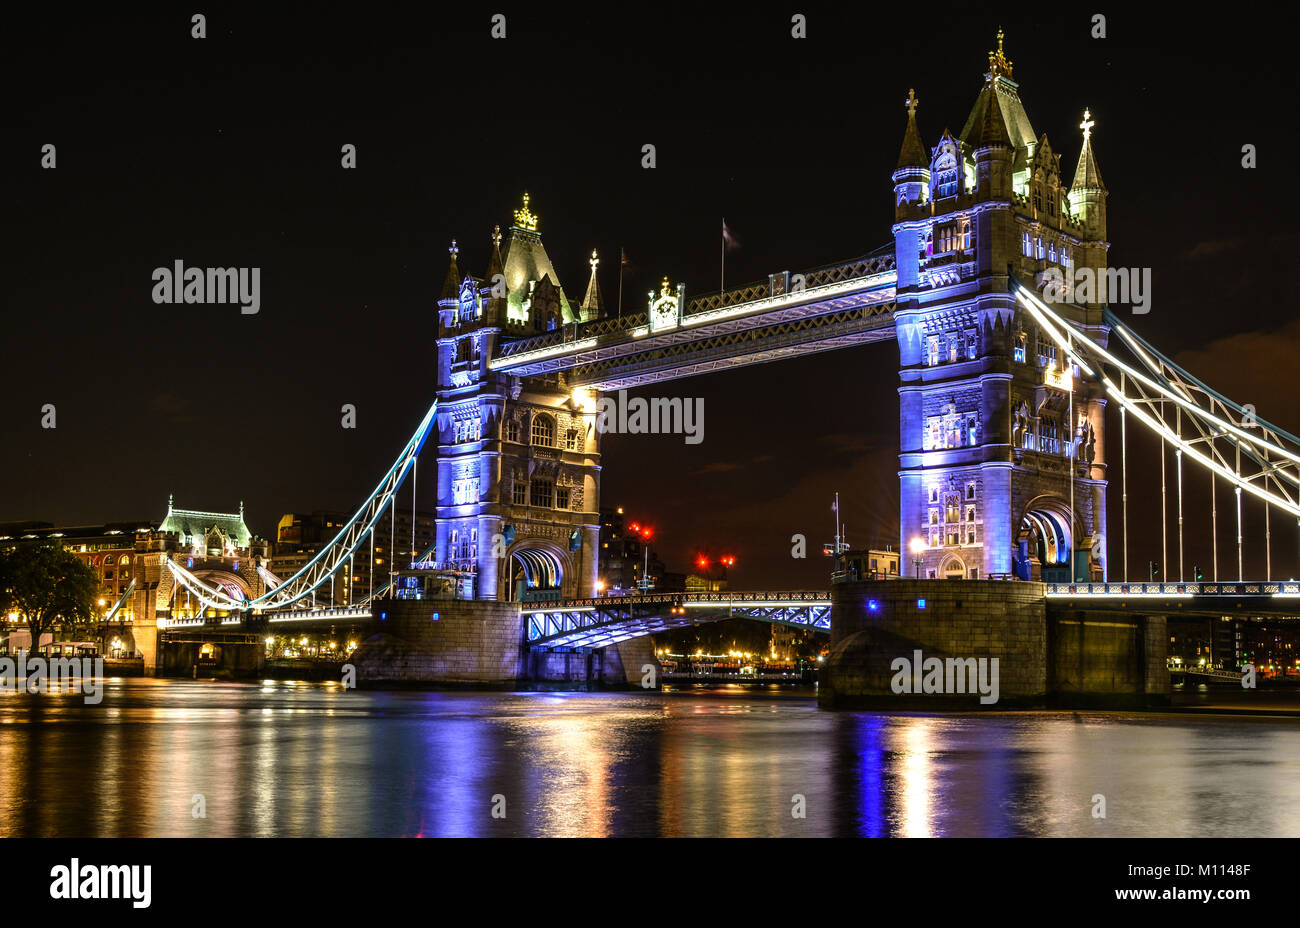 Tower Bridge is a famous icon of London, England that was built in 1894 on river Thames. Each tower reaches a height of 65 meters. Stock Photo